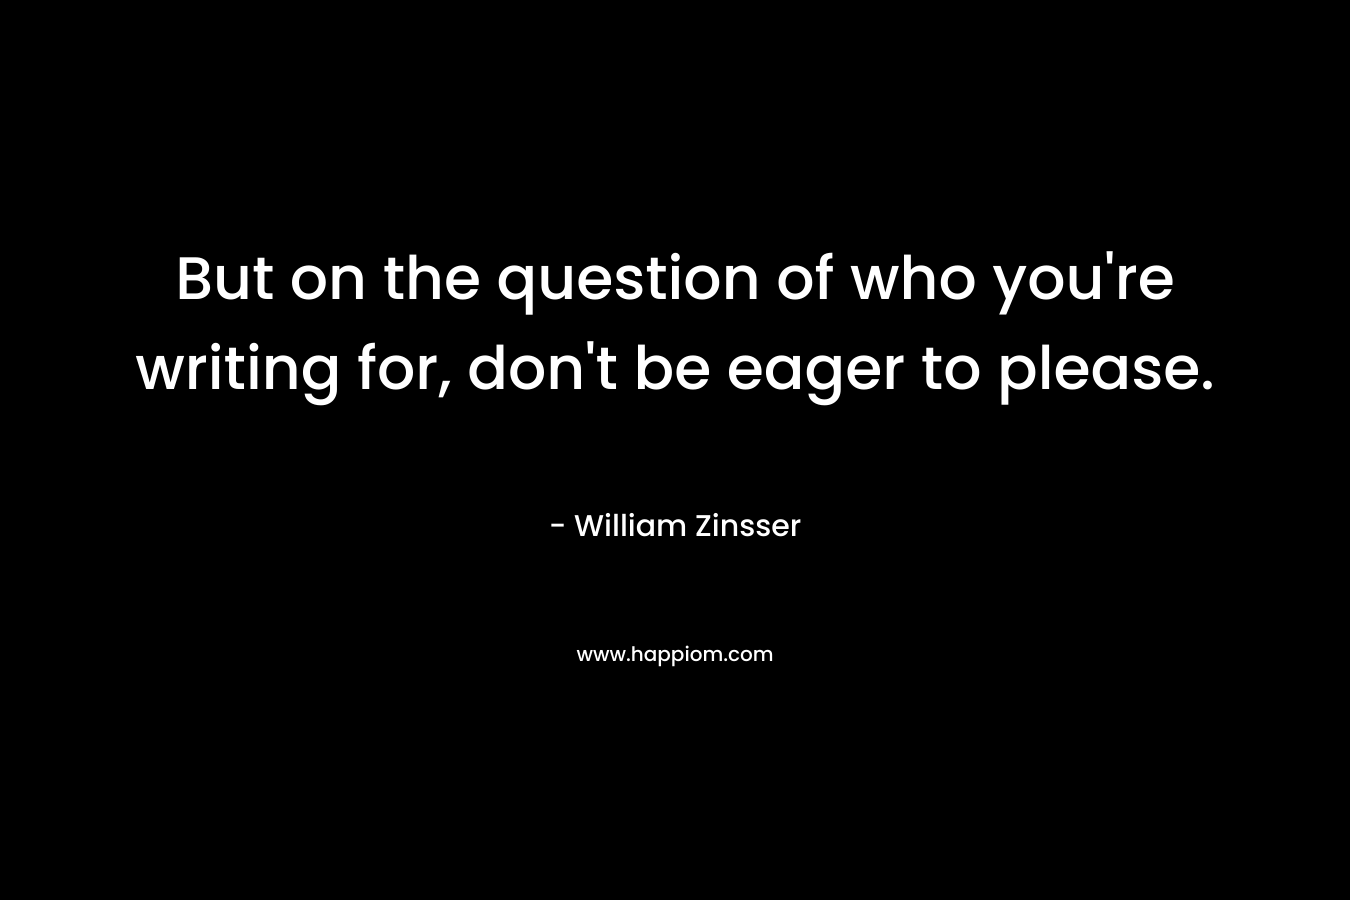 But on the question of who you’re writing for, don’t be eager to please. – William Zinsser